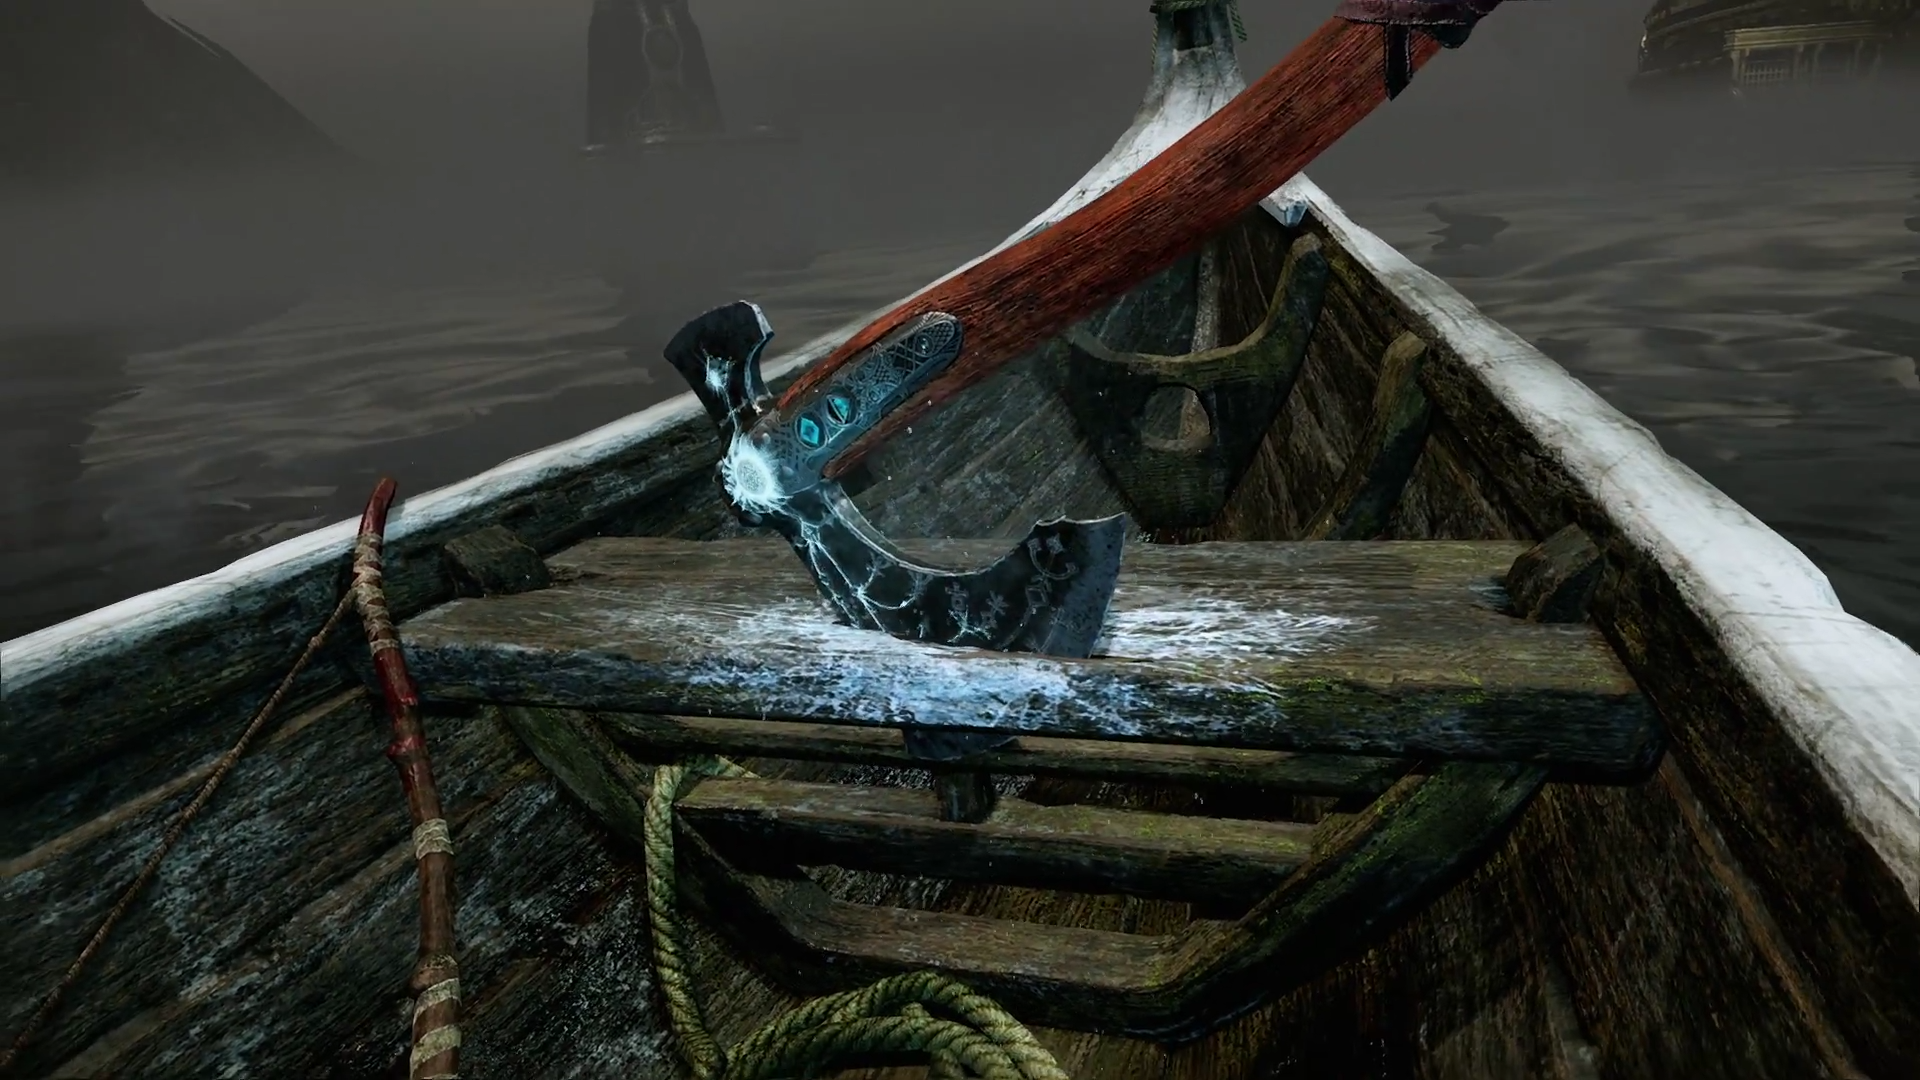 General 1920x1080 God of War (2018) screen shot boat vehicle axes weapon bow